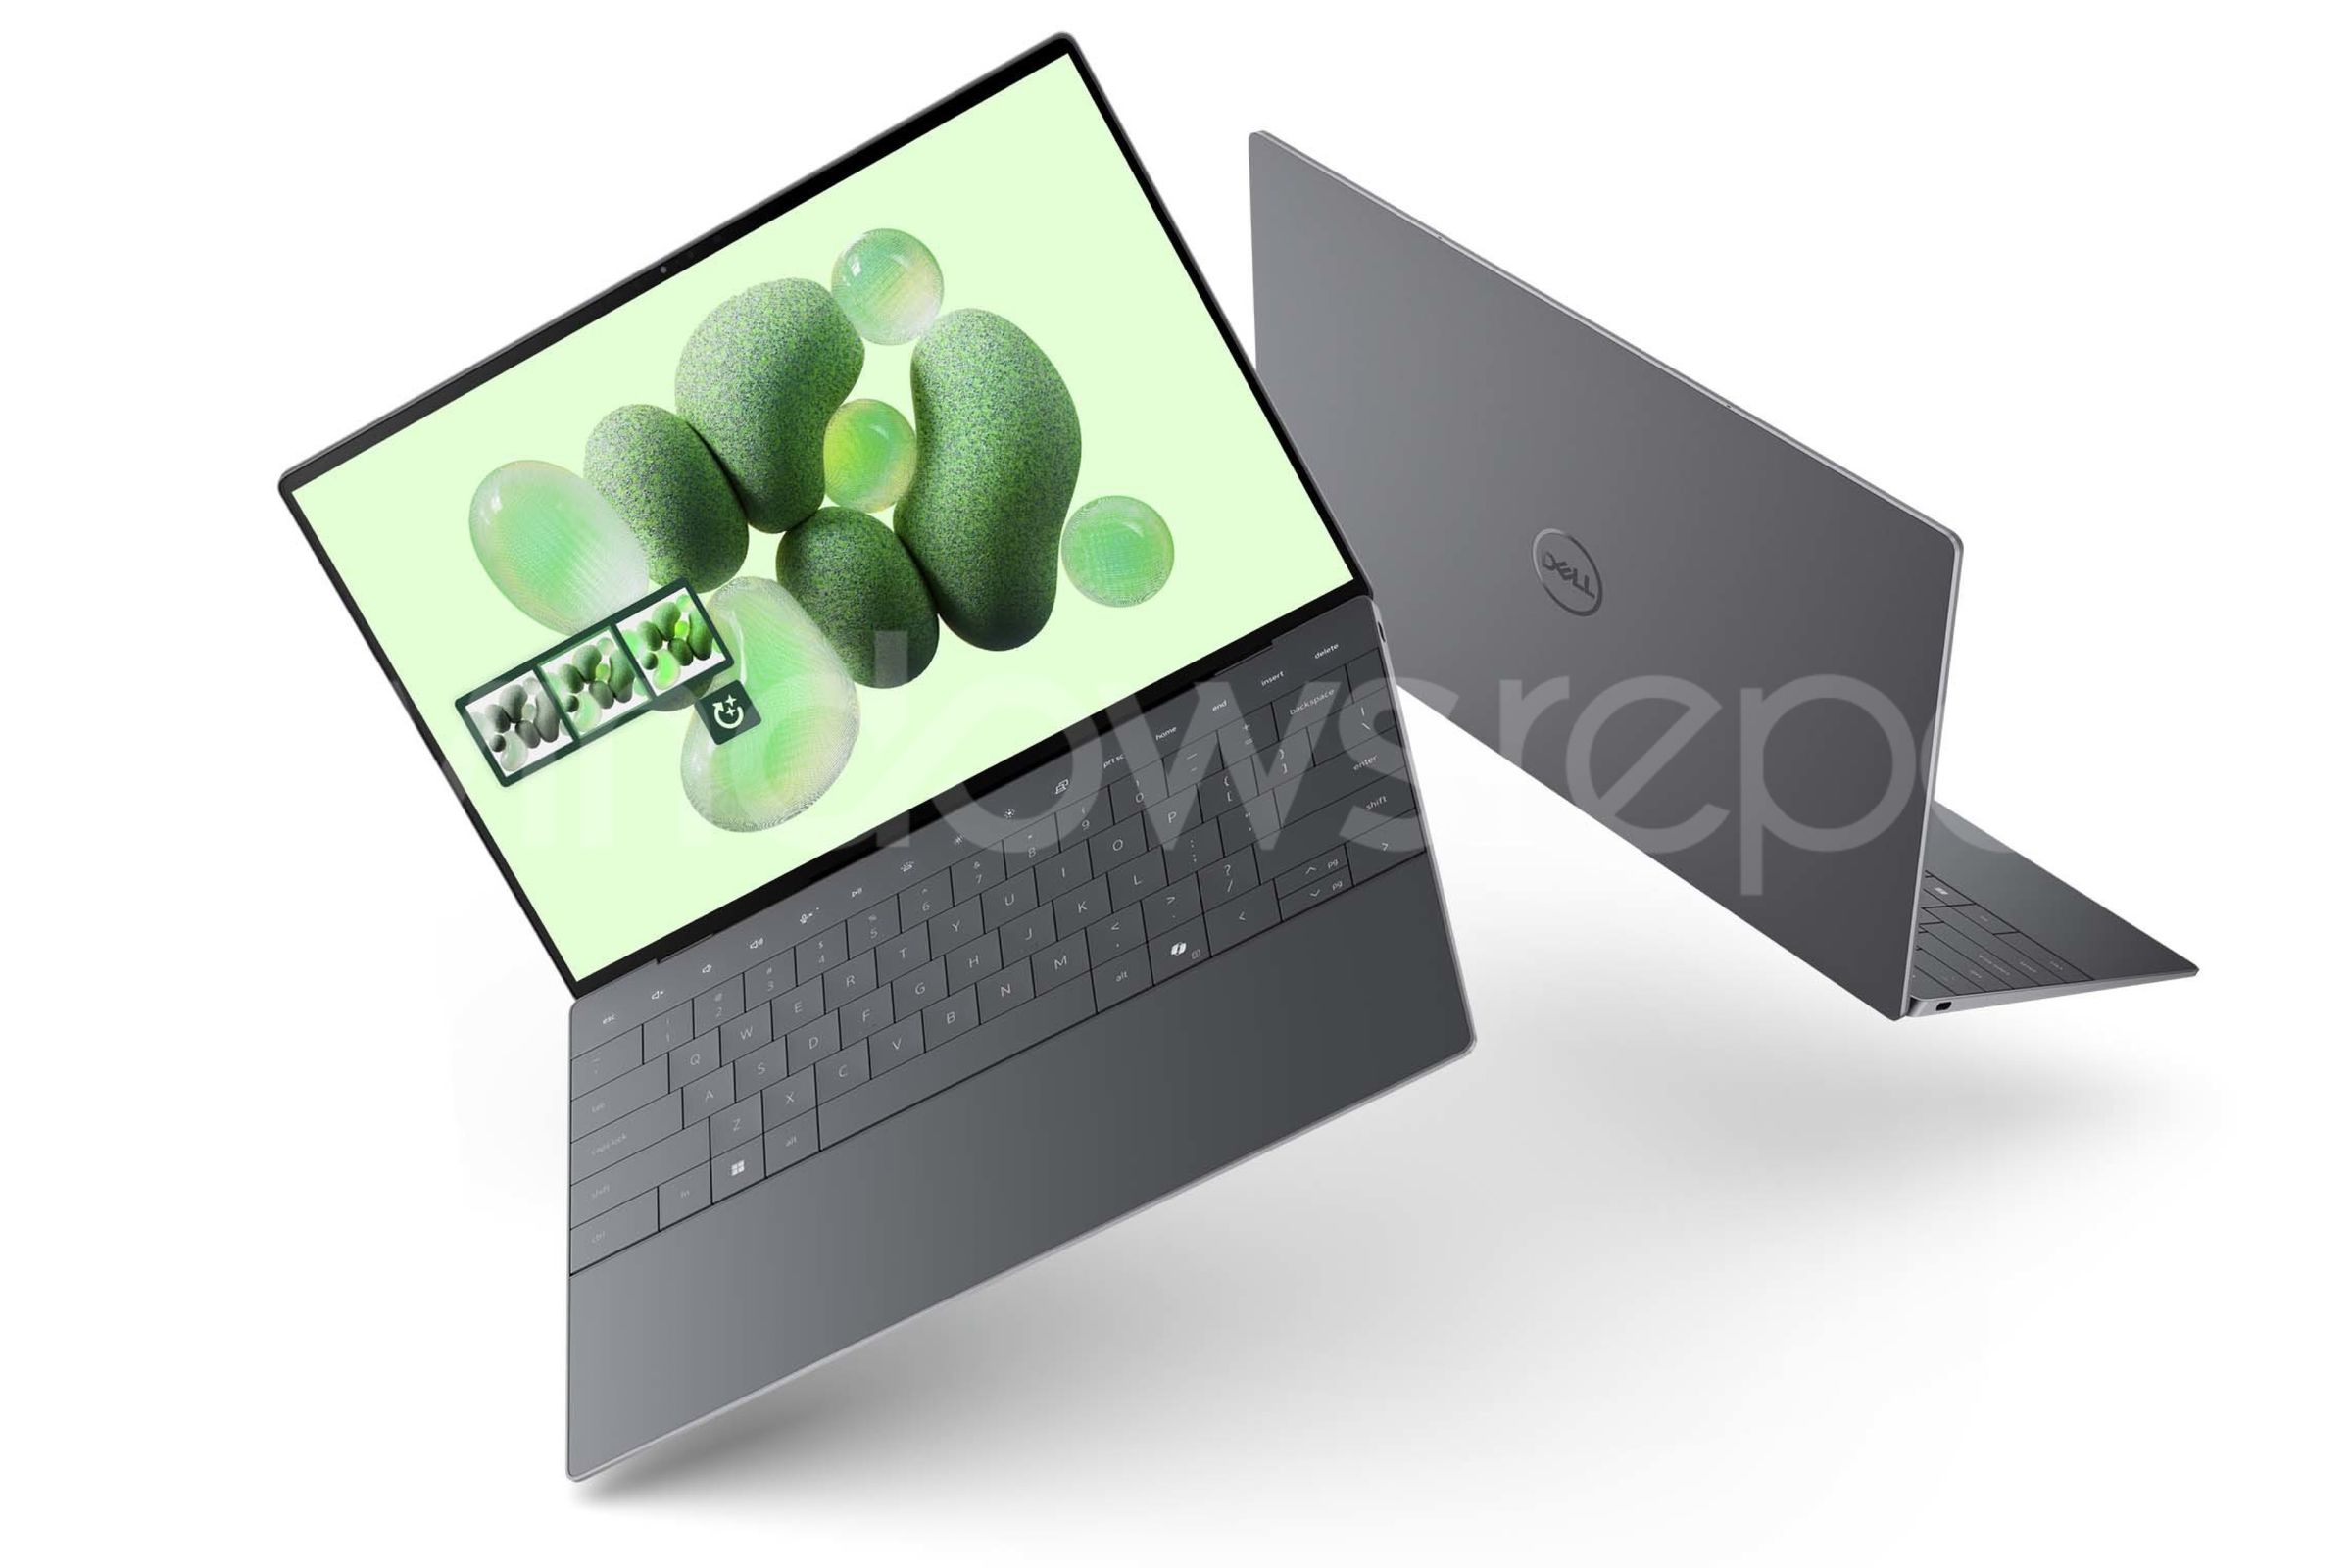 dell laptops floating back to back and opened showing slimness, green wallpaper screen with balloons, there's a copilot key on the bottom keyboard row